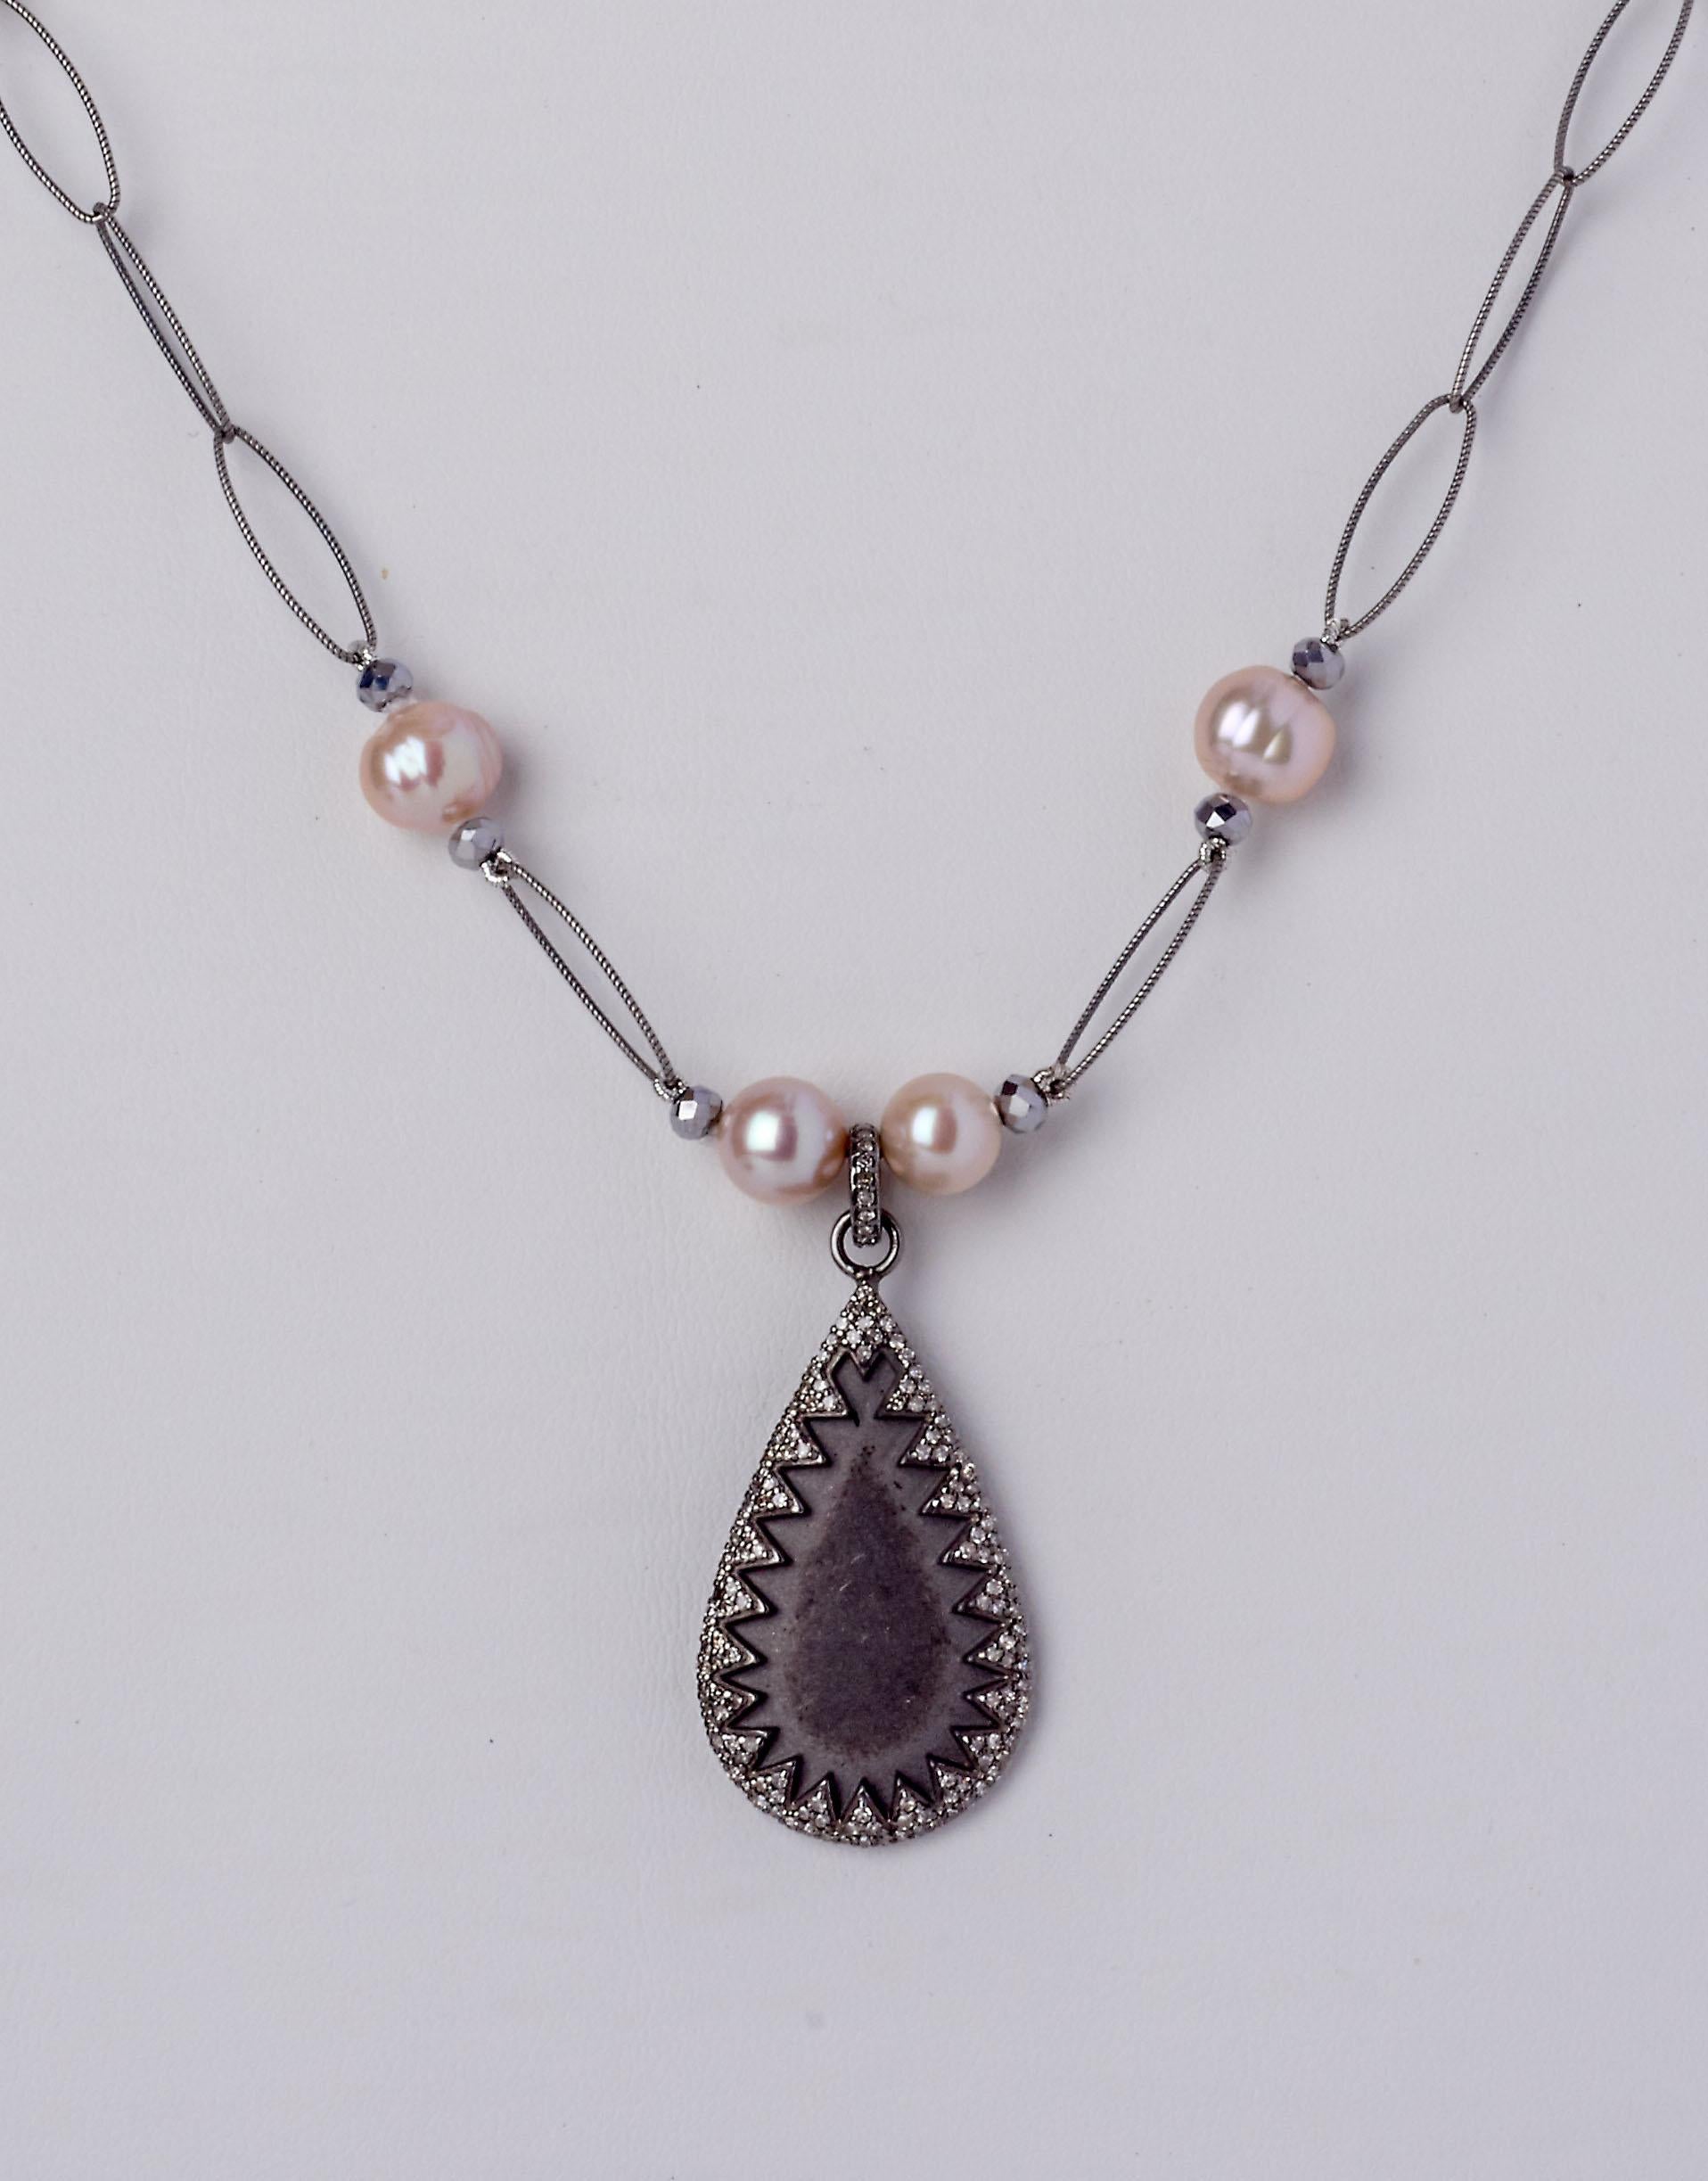 A fresh, light feminine look radiates from this expertly crafted 26 inch necklace featuring soft blush color Akoya Pearls flanked by faucet-cut Hematite beads complimented by the soft gray tones of an oxidized sterling silver oval link chain all